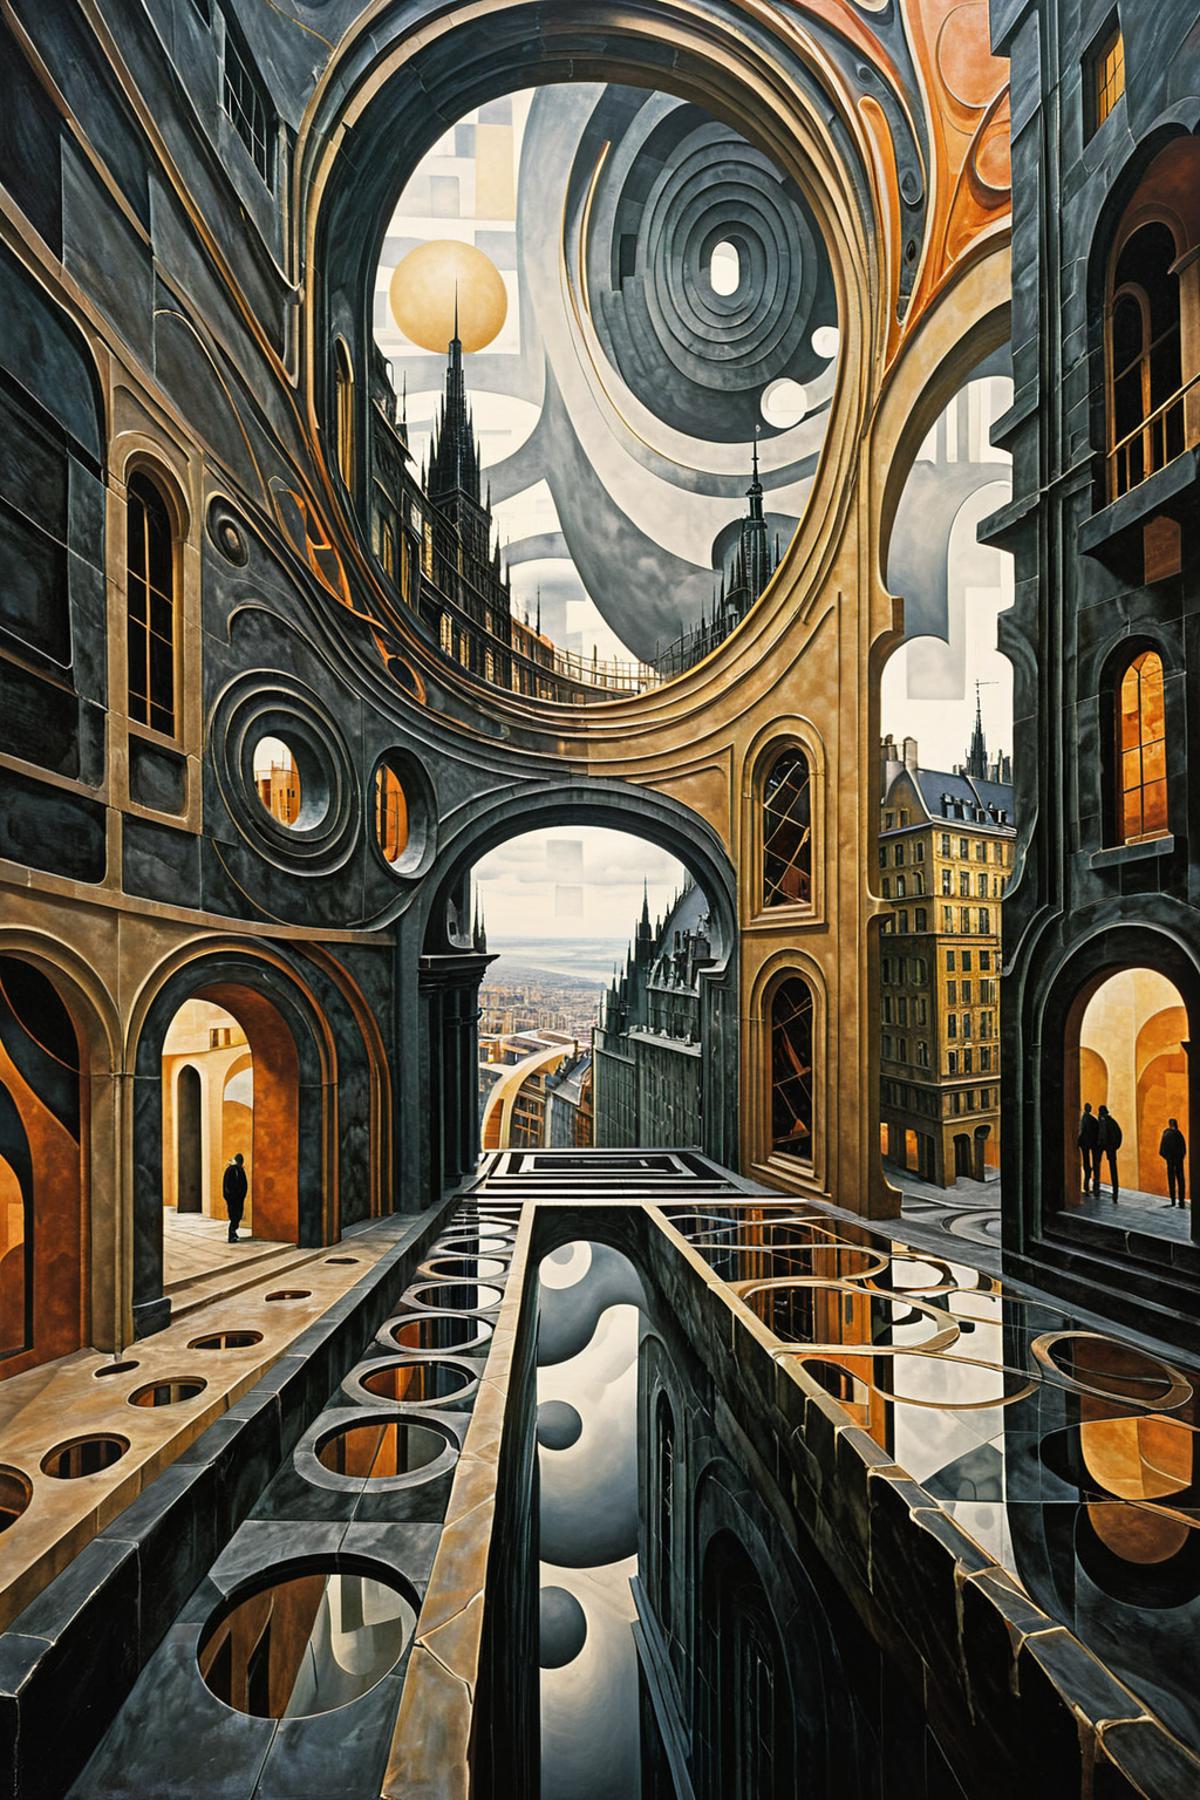 A Cityscape Artwork with Archways, Towers, and Buildings